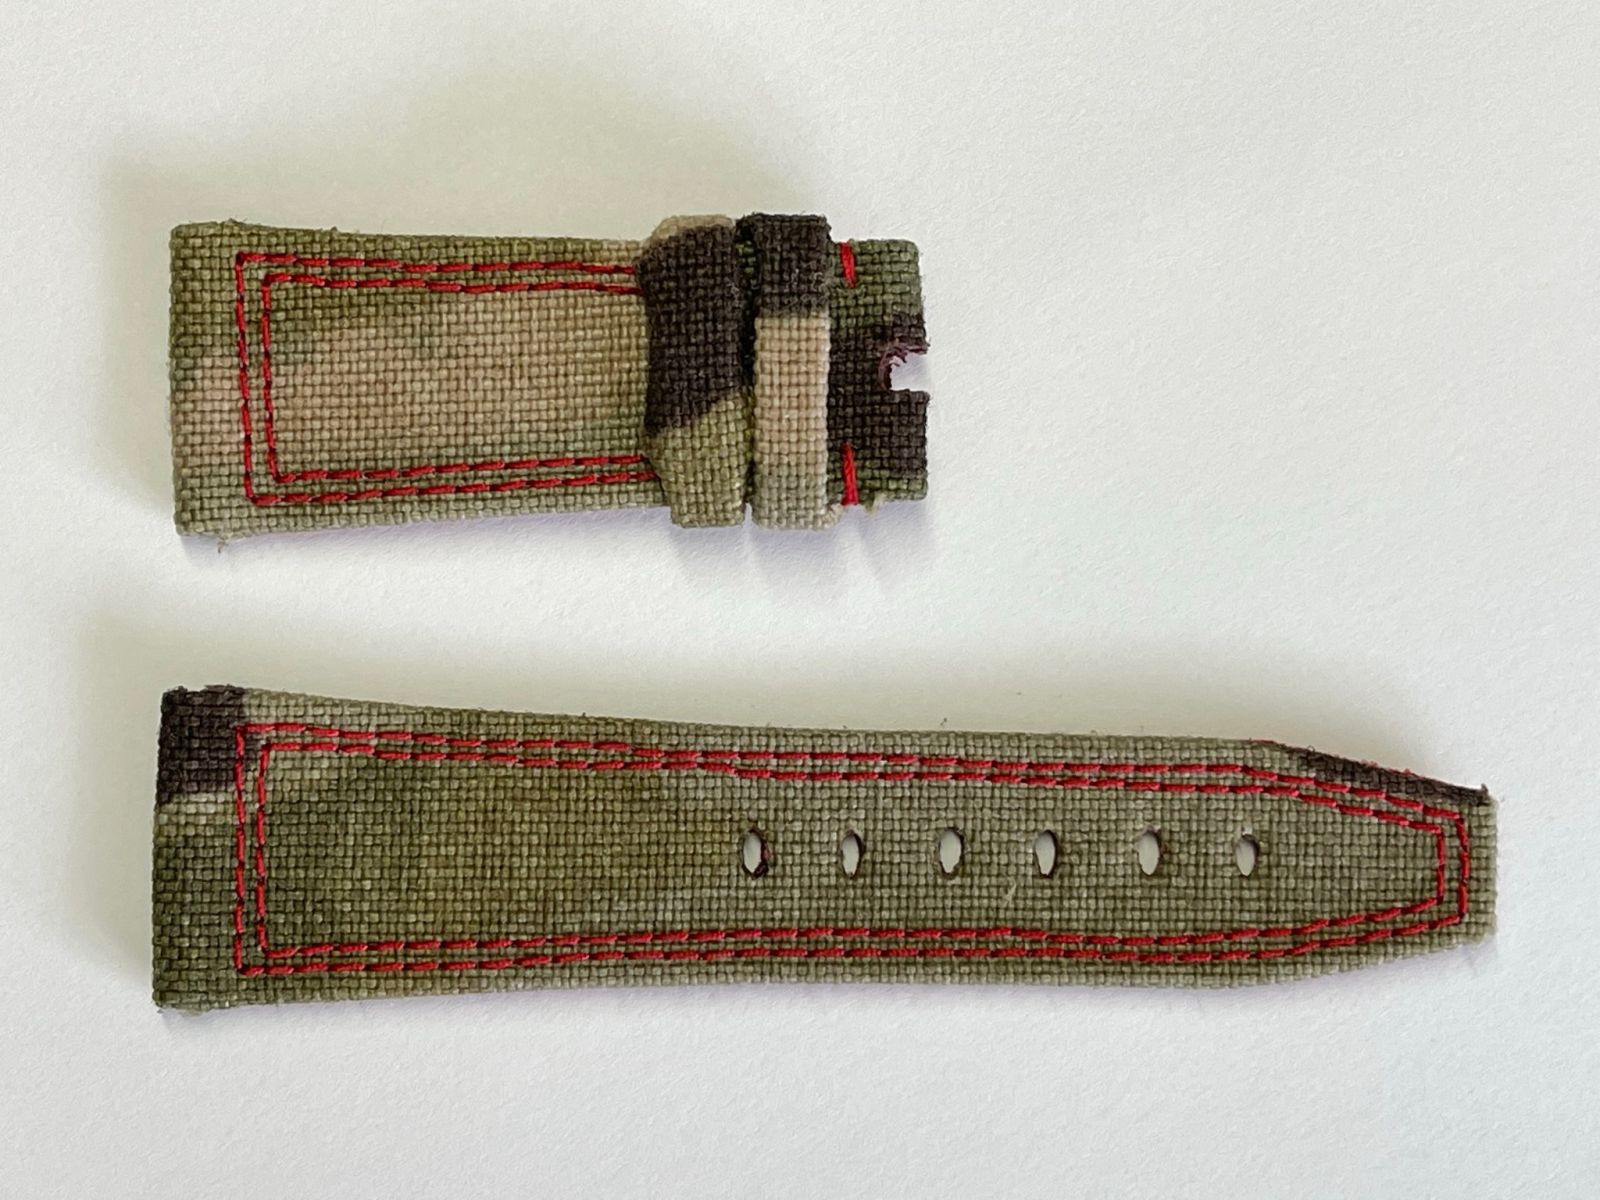 Green Army Camouflage Cordura® Panerai style strap. Red double stitching